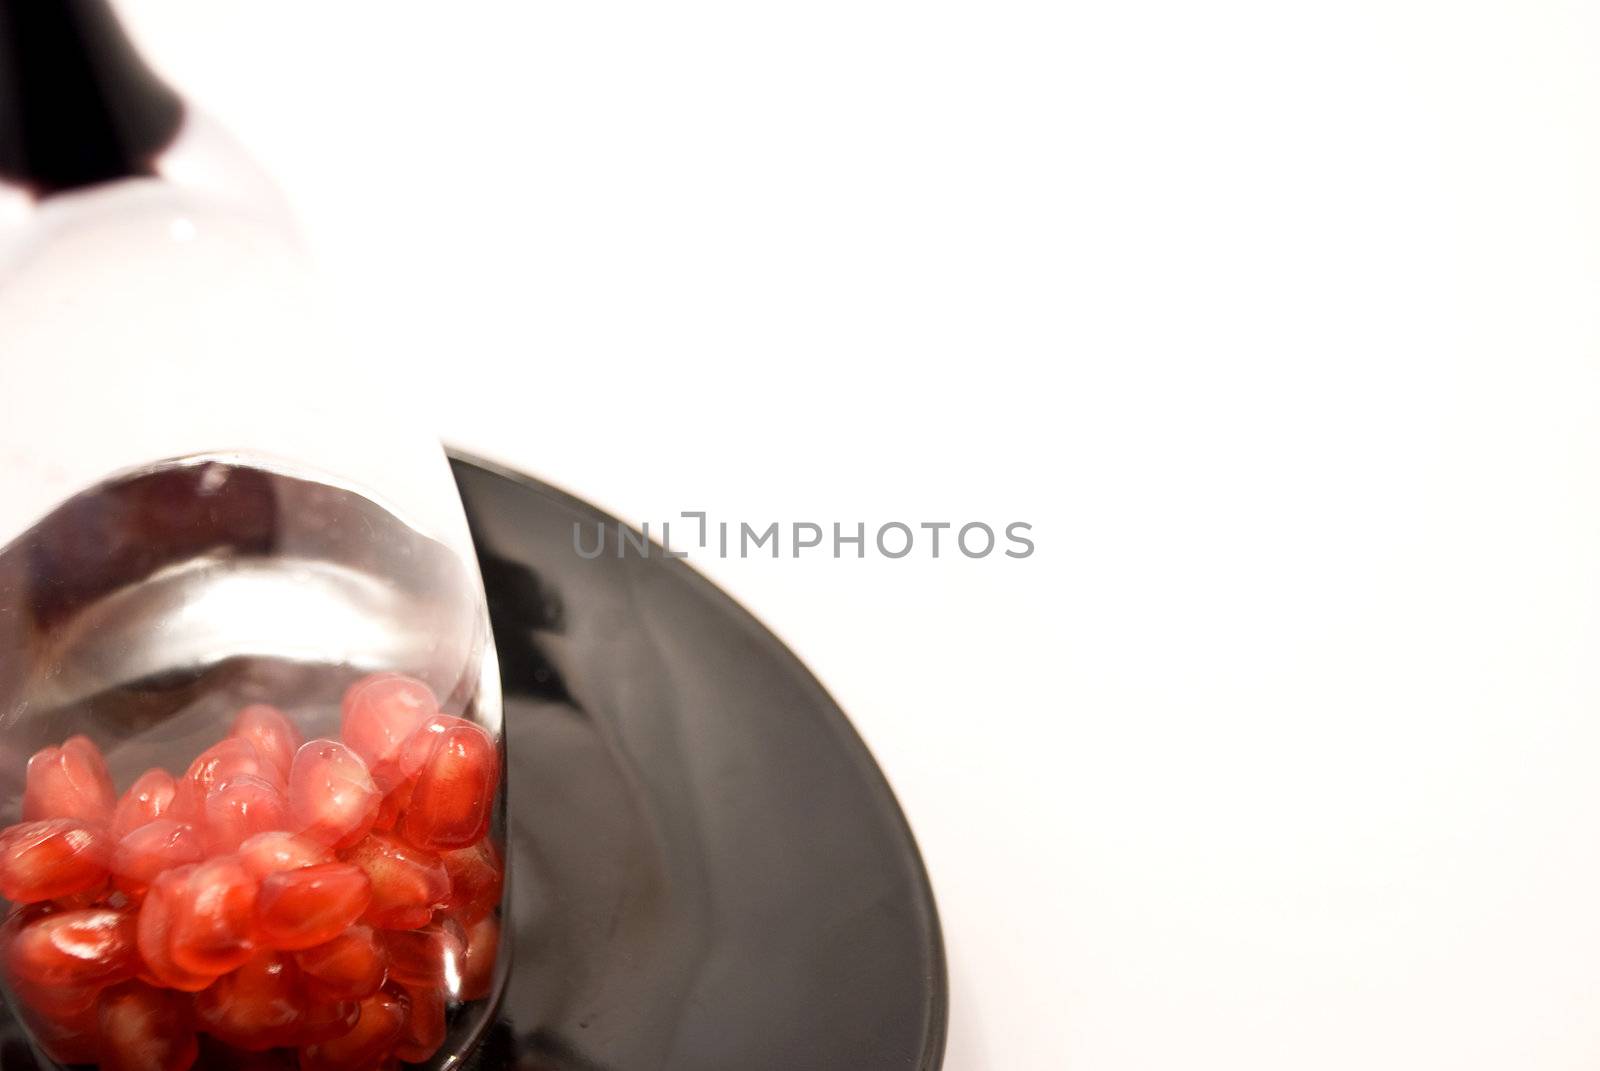 Seeds grenade on a plate inside the wineglass by jannyjus